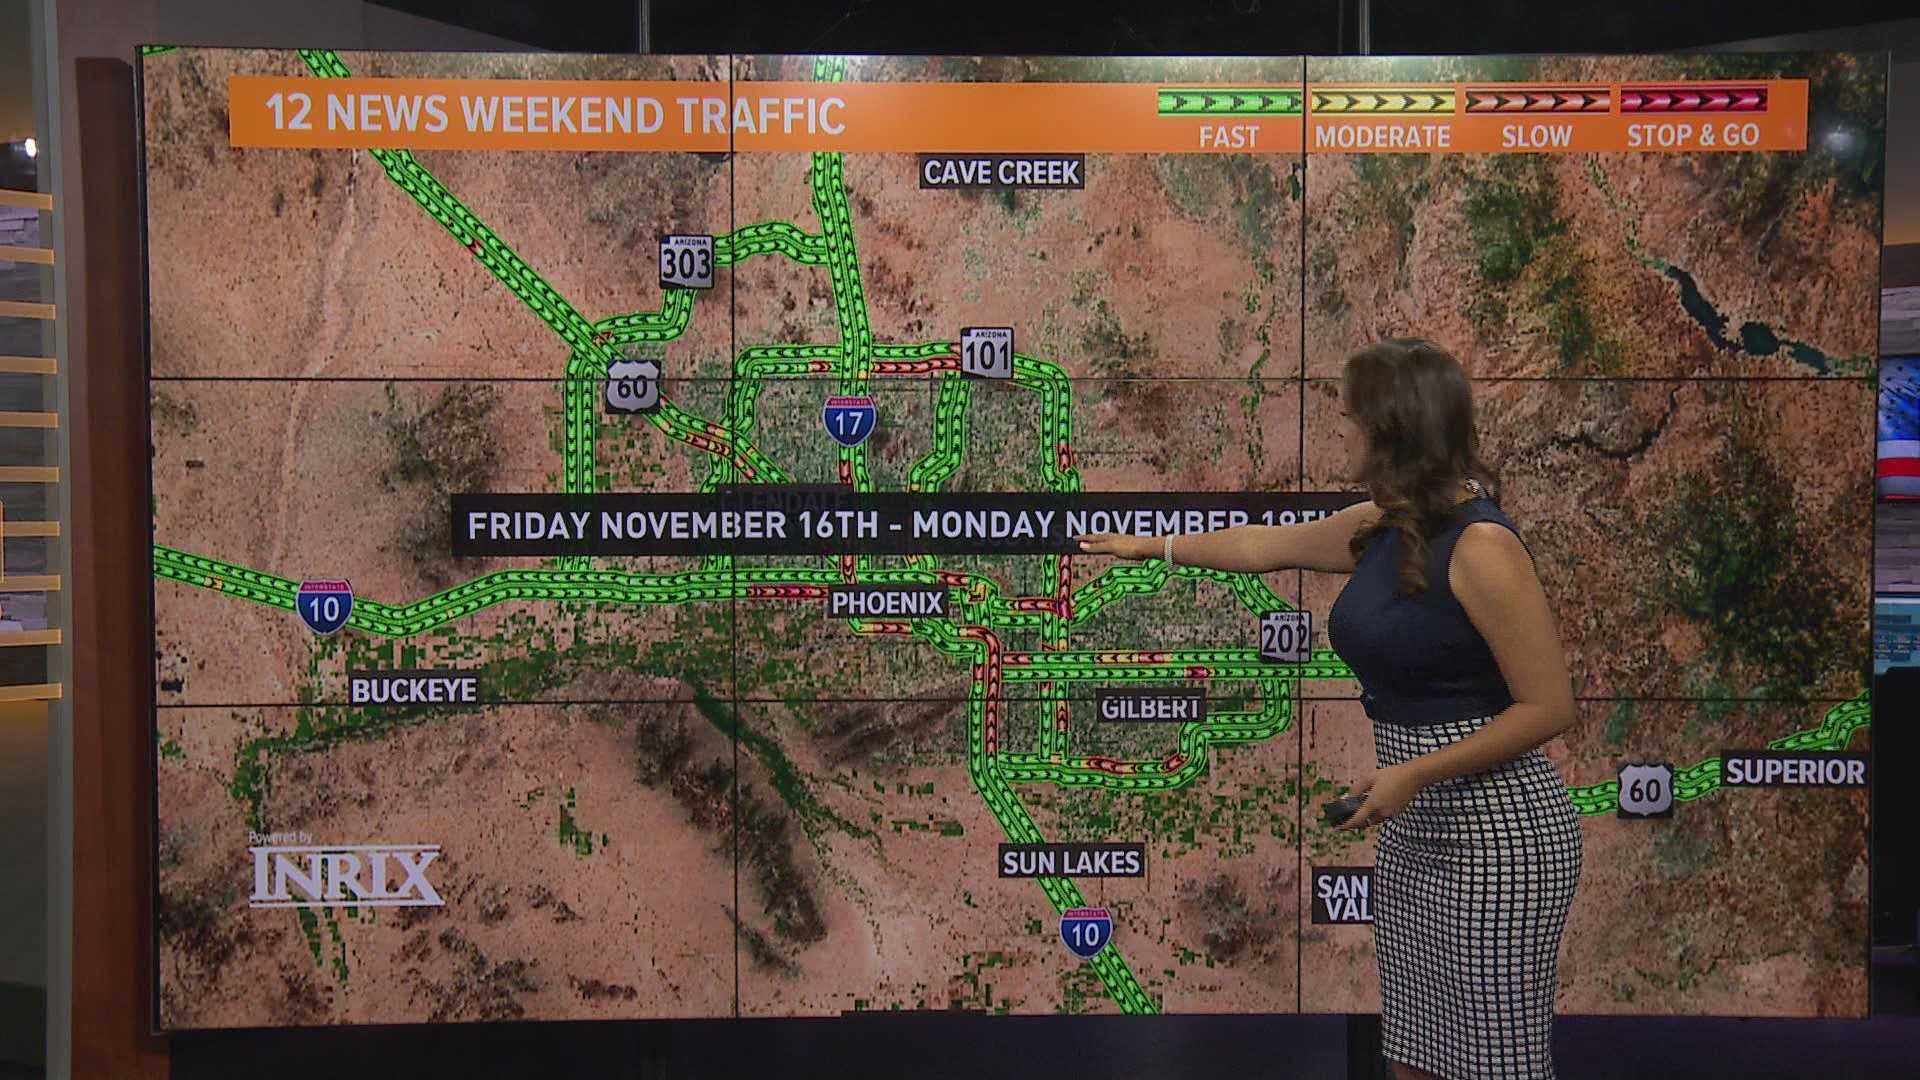 Here's your weekend traffic outlook for November 16 - November 19.